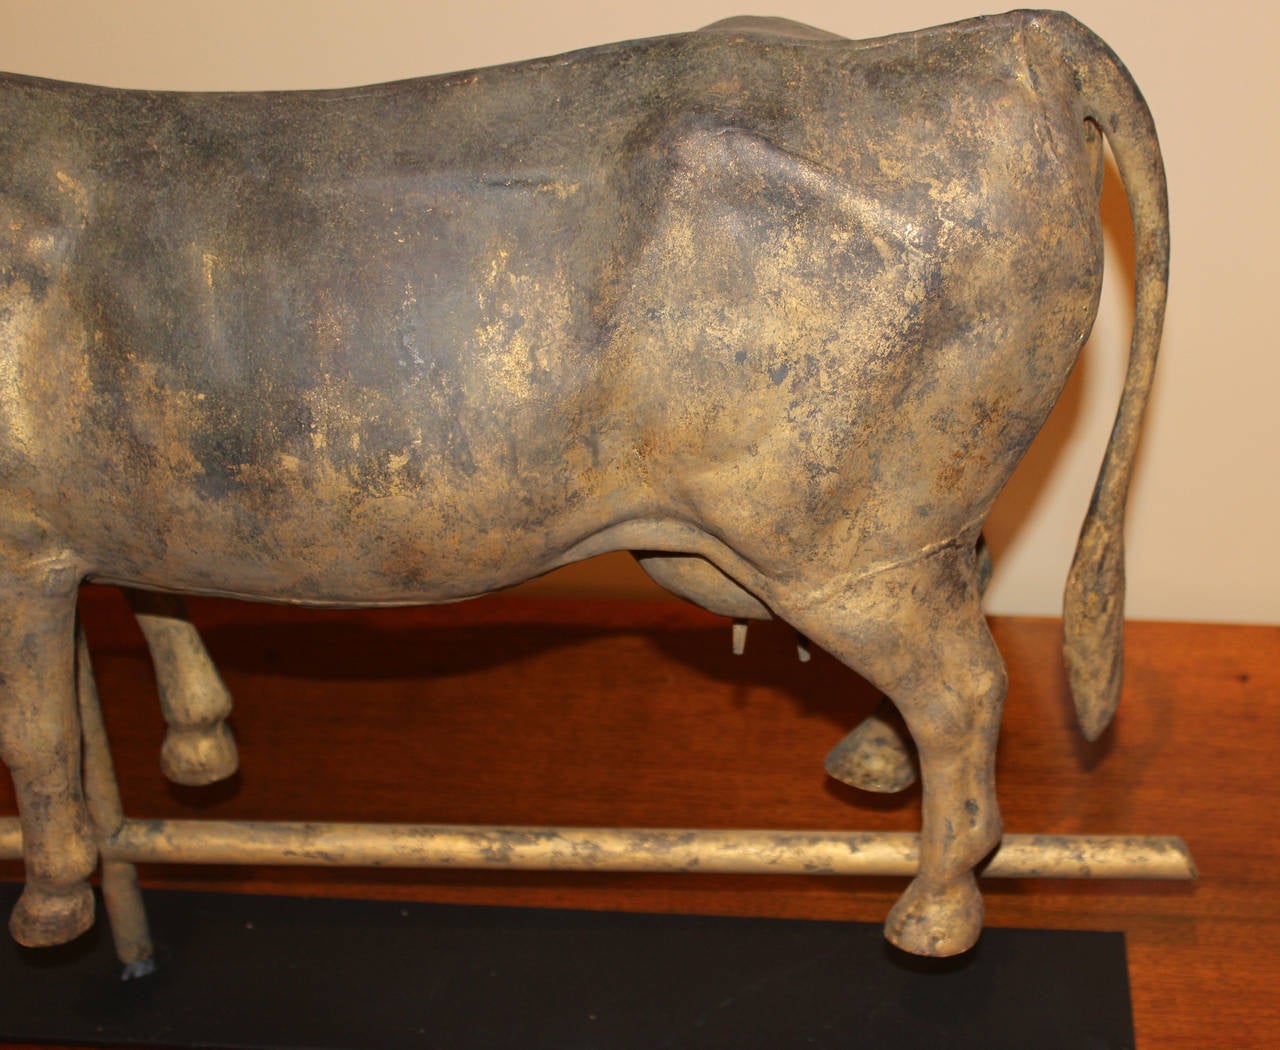 19th Century Full-Bodied Cow, Copper and Zinc Weathervane by J.W. Fiske & Co. 1